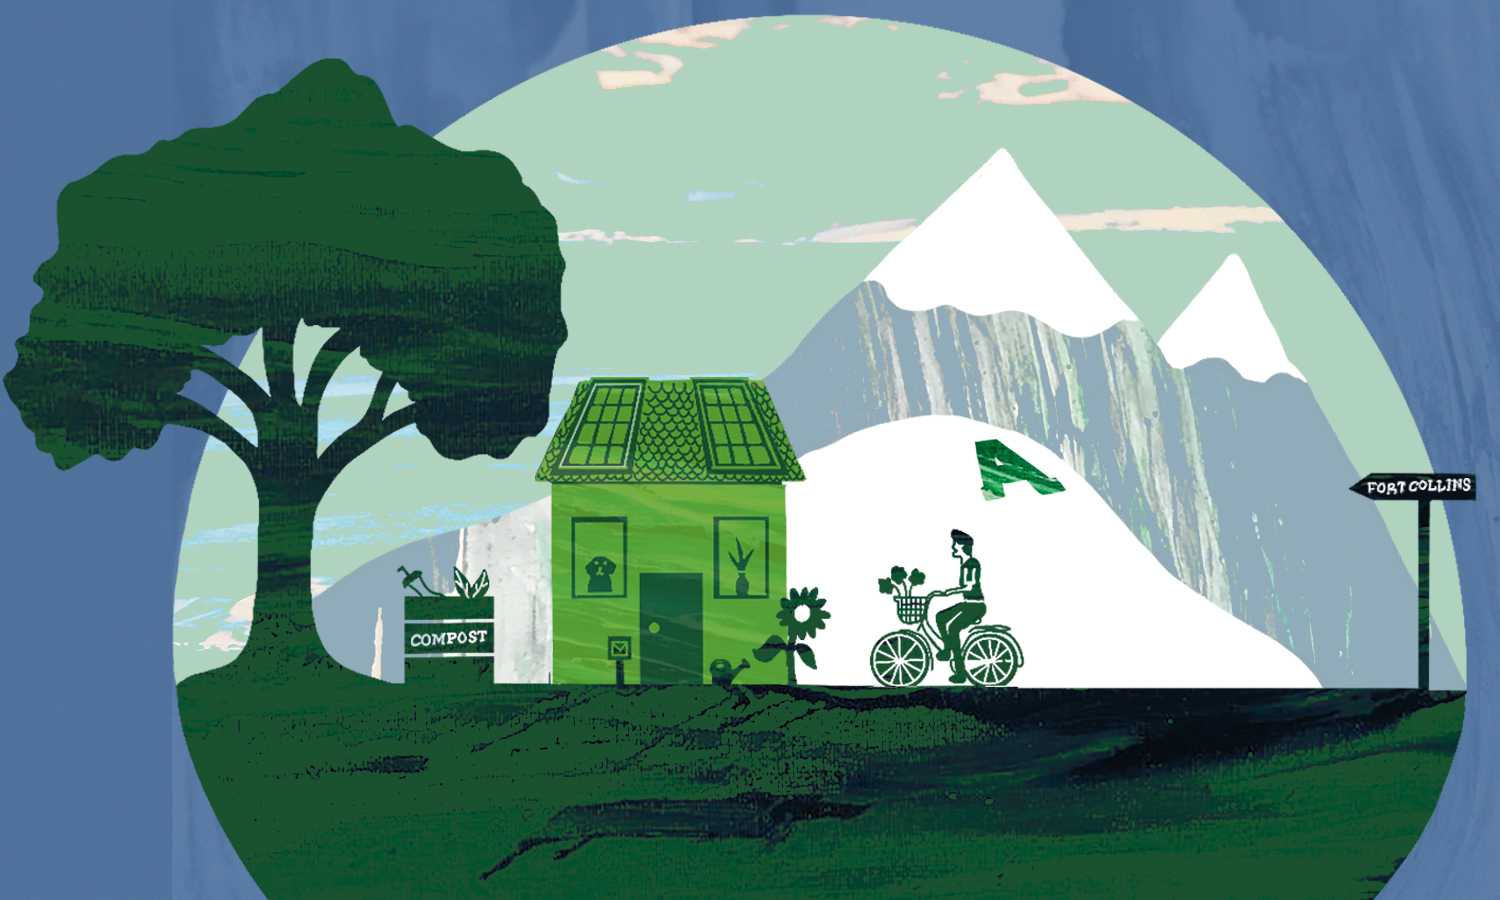 graphic illustration depicting a green fort collins with a figure riding a bike in front of mountains towards a house with a compost bin in the backyard